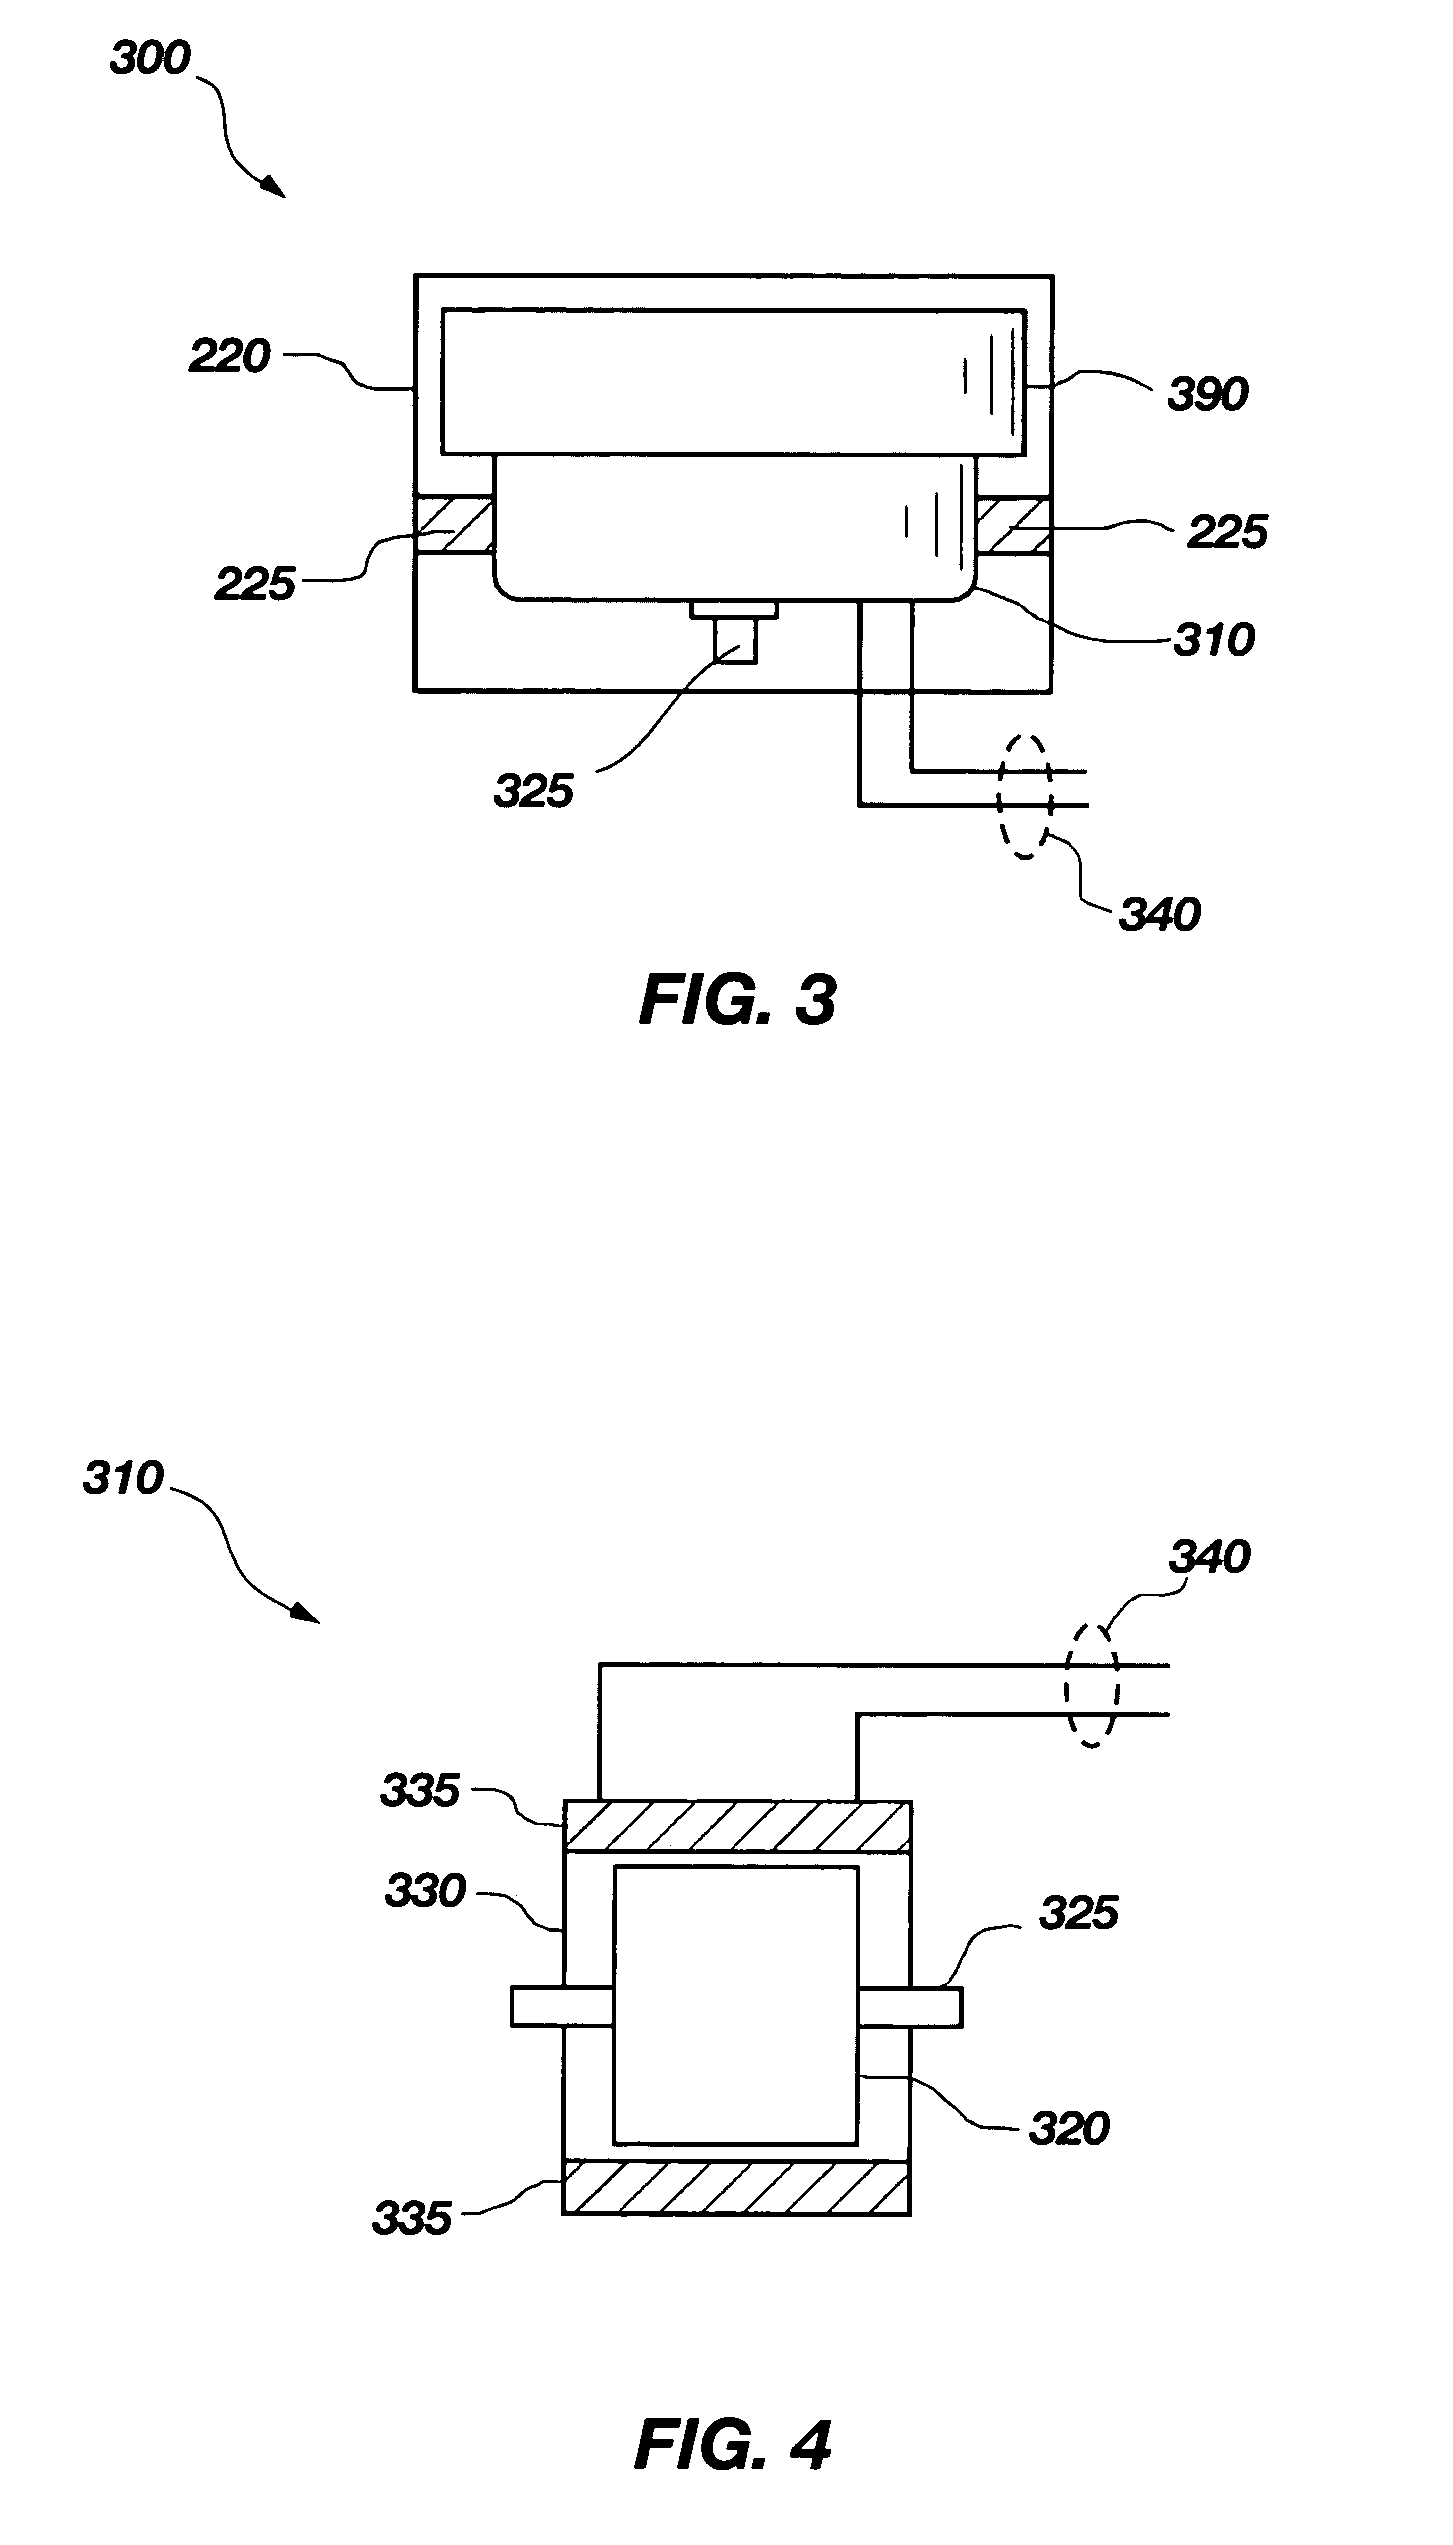 Method and apparatus for spin sensing in munitions